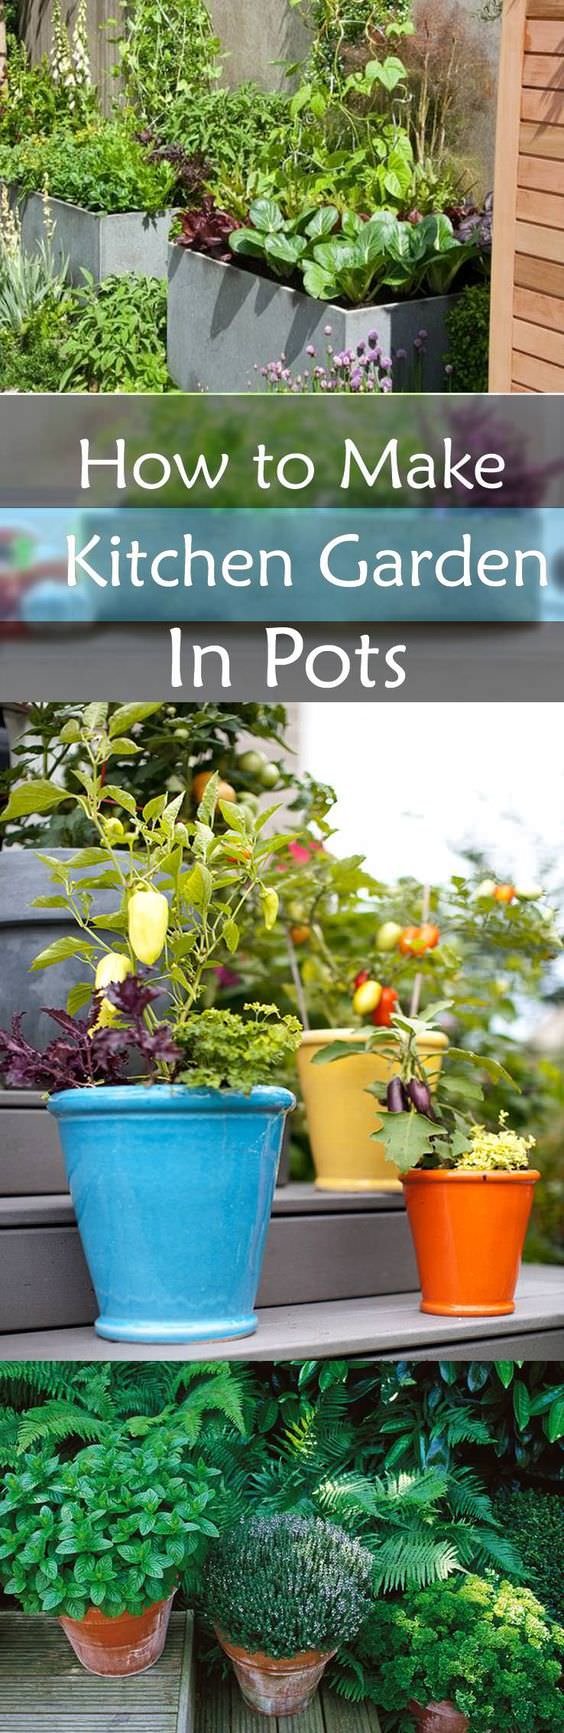 Learn how to make a kitchen garden in pots. See tips on growing fresh and organic vegetables and herbs in your container kitchen garden.